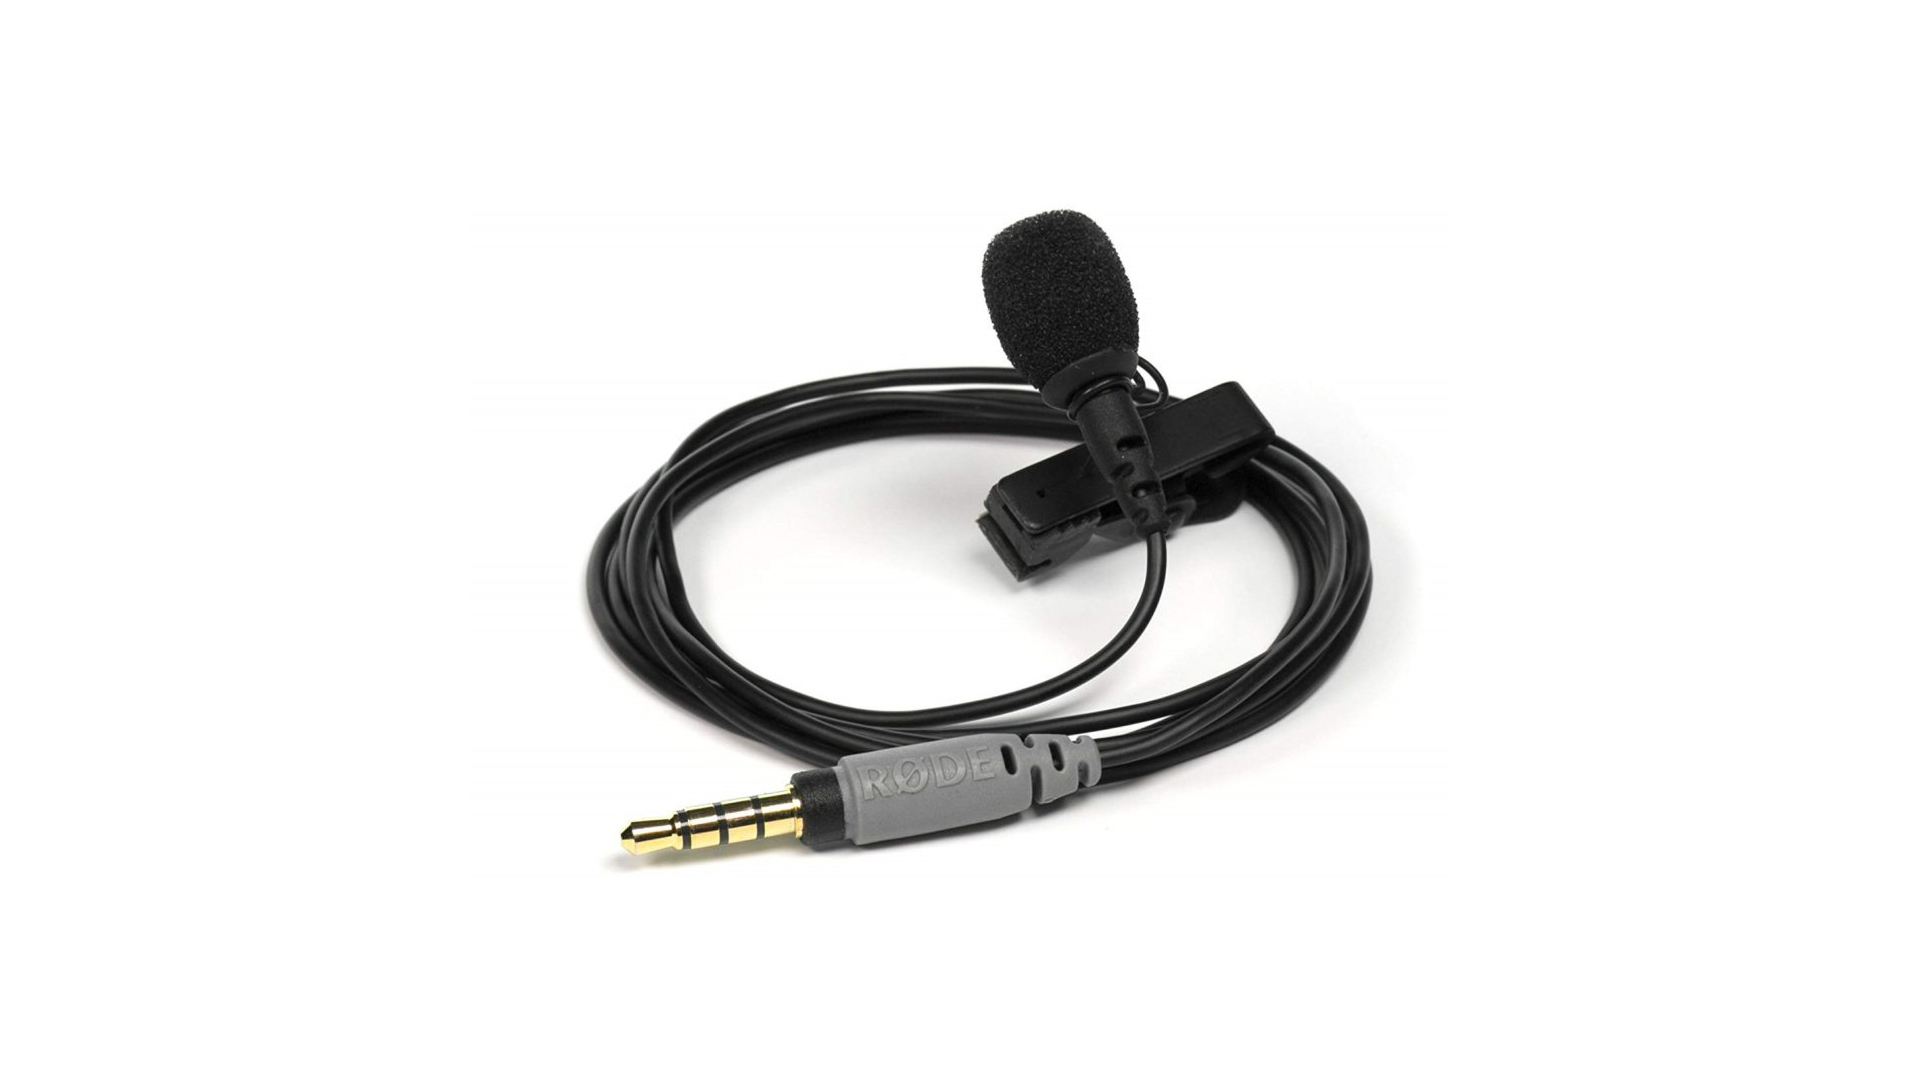 Rode lavalier microphone on white background